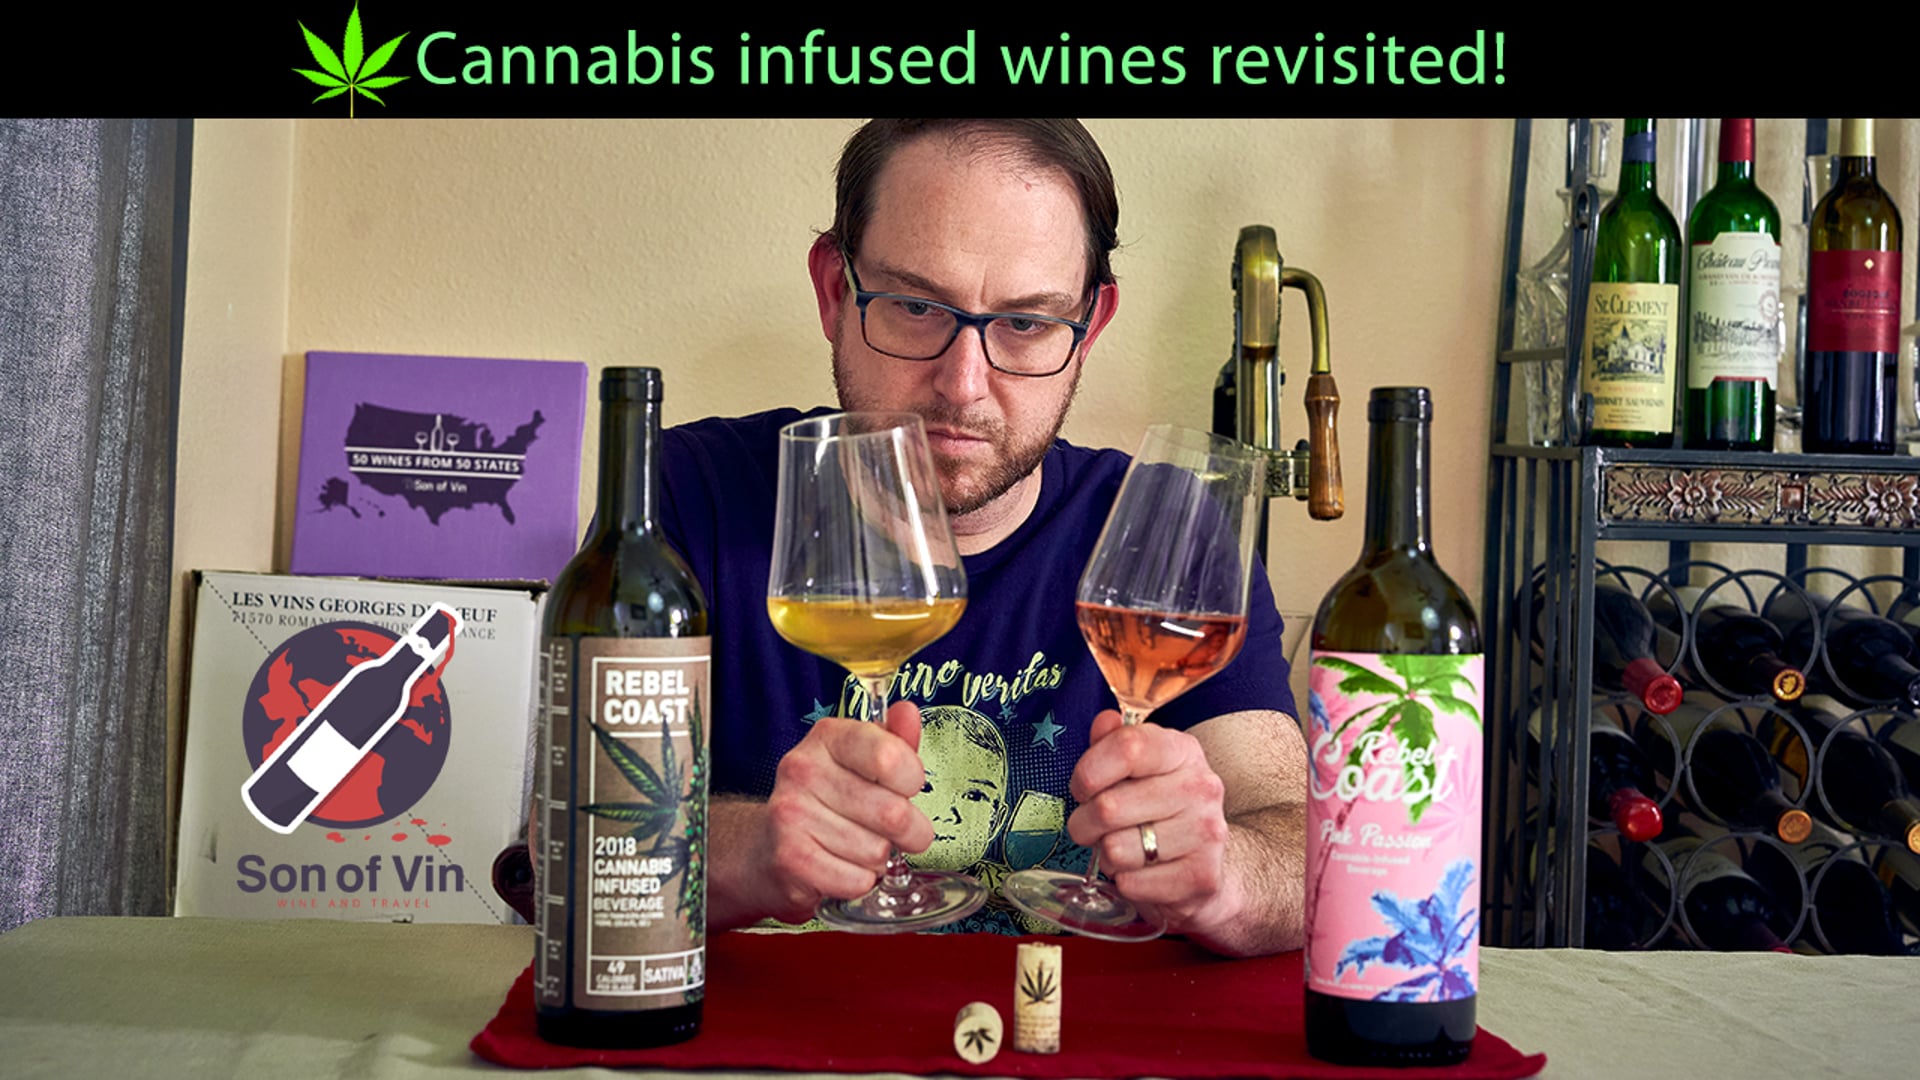 Watch Revisiting Cannabis infused wines by Rebel Coast Winery on our Free Roku Channel